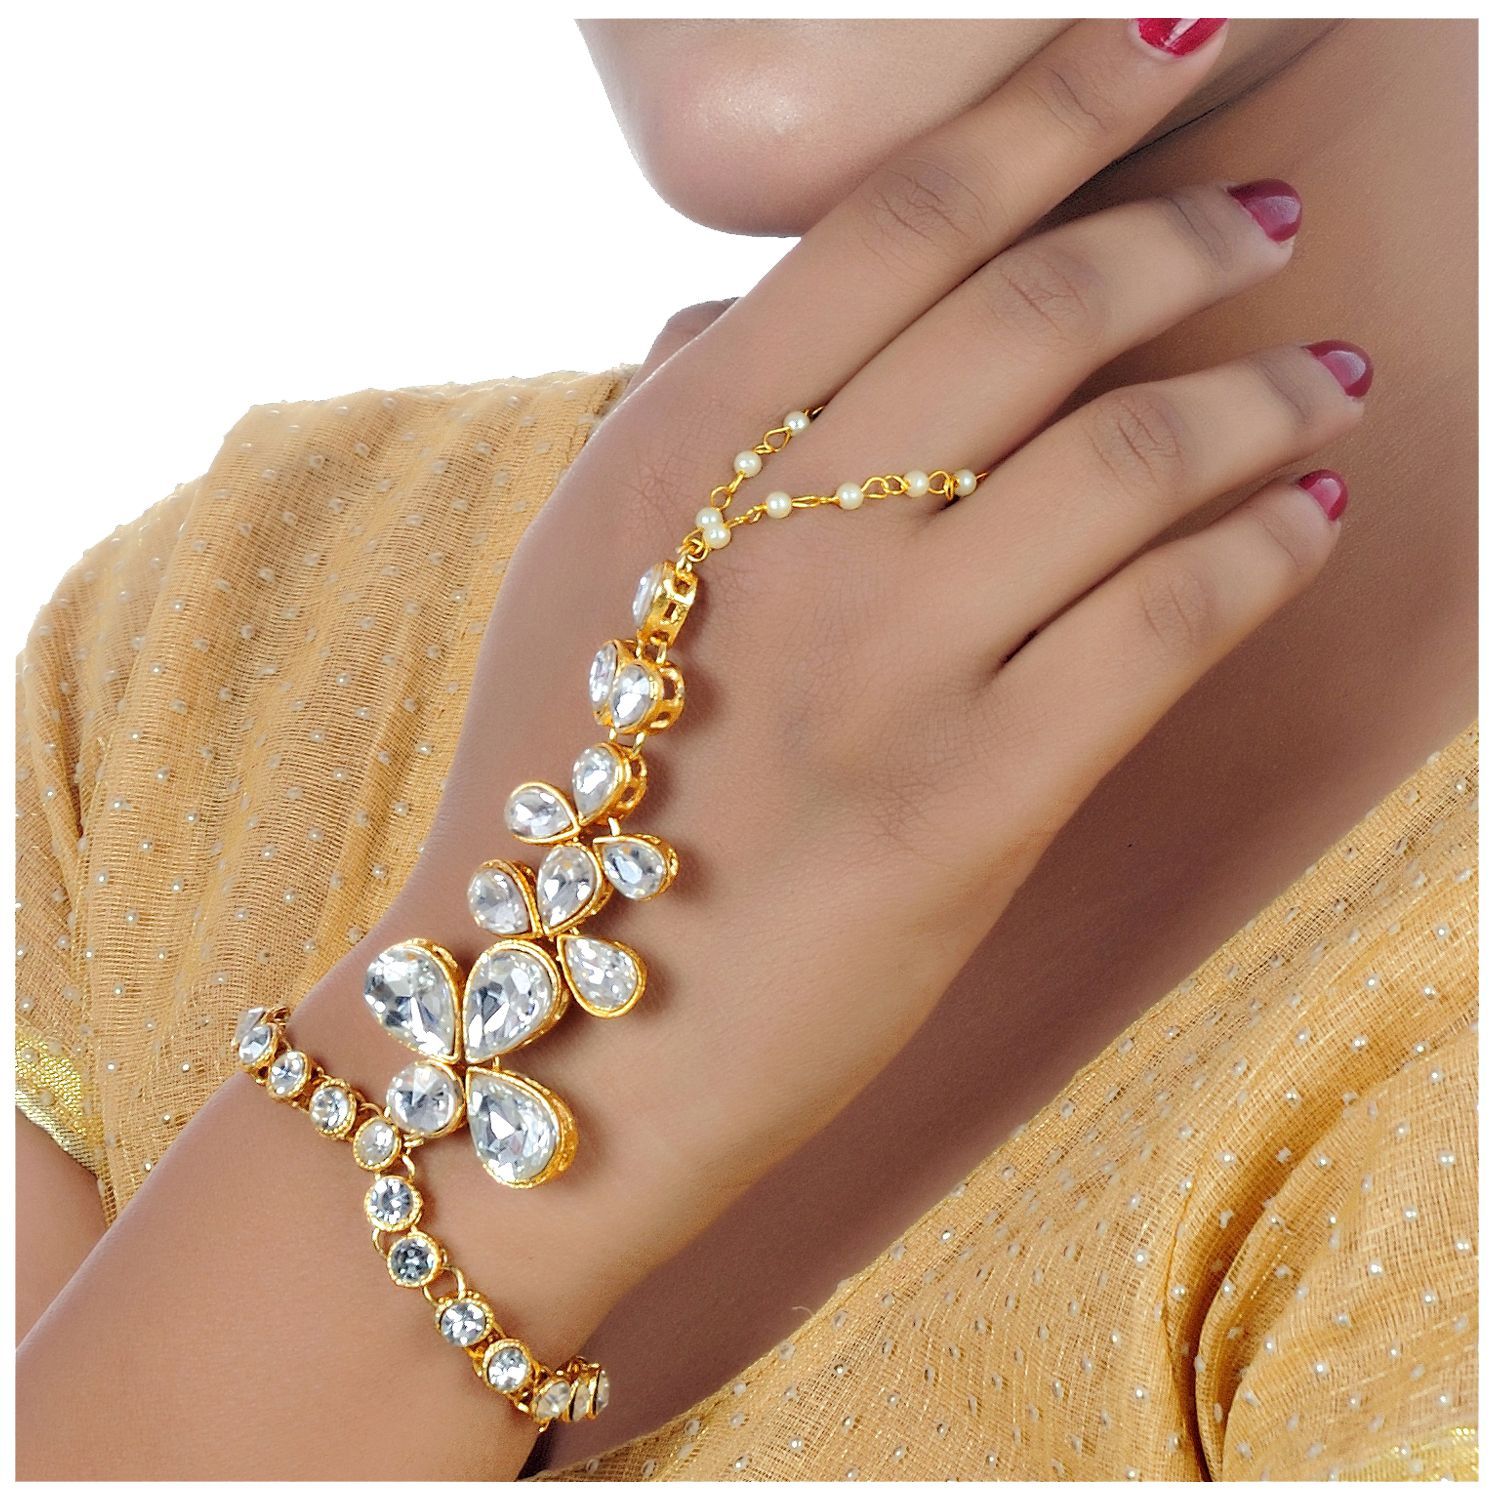 Atentuyi Layered Crystal Finger Ring Bracelet Gold Hand Chain Harness  Crystal Finger Chain Boho Slave Bracelet Crystal Bracelet Wedding Jewelry  Accessories for Women and Girls price in UAE | Amazon UAE | kanbkam